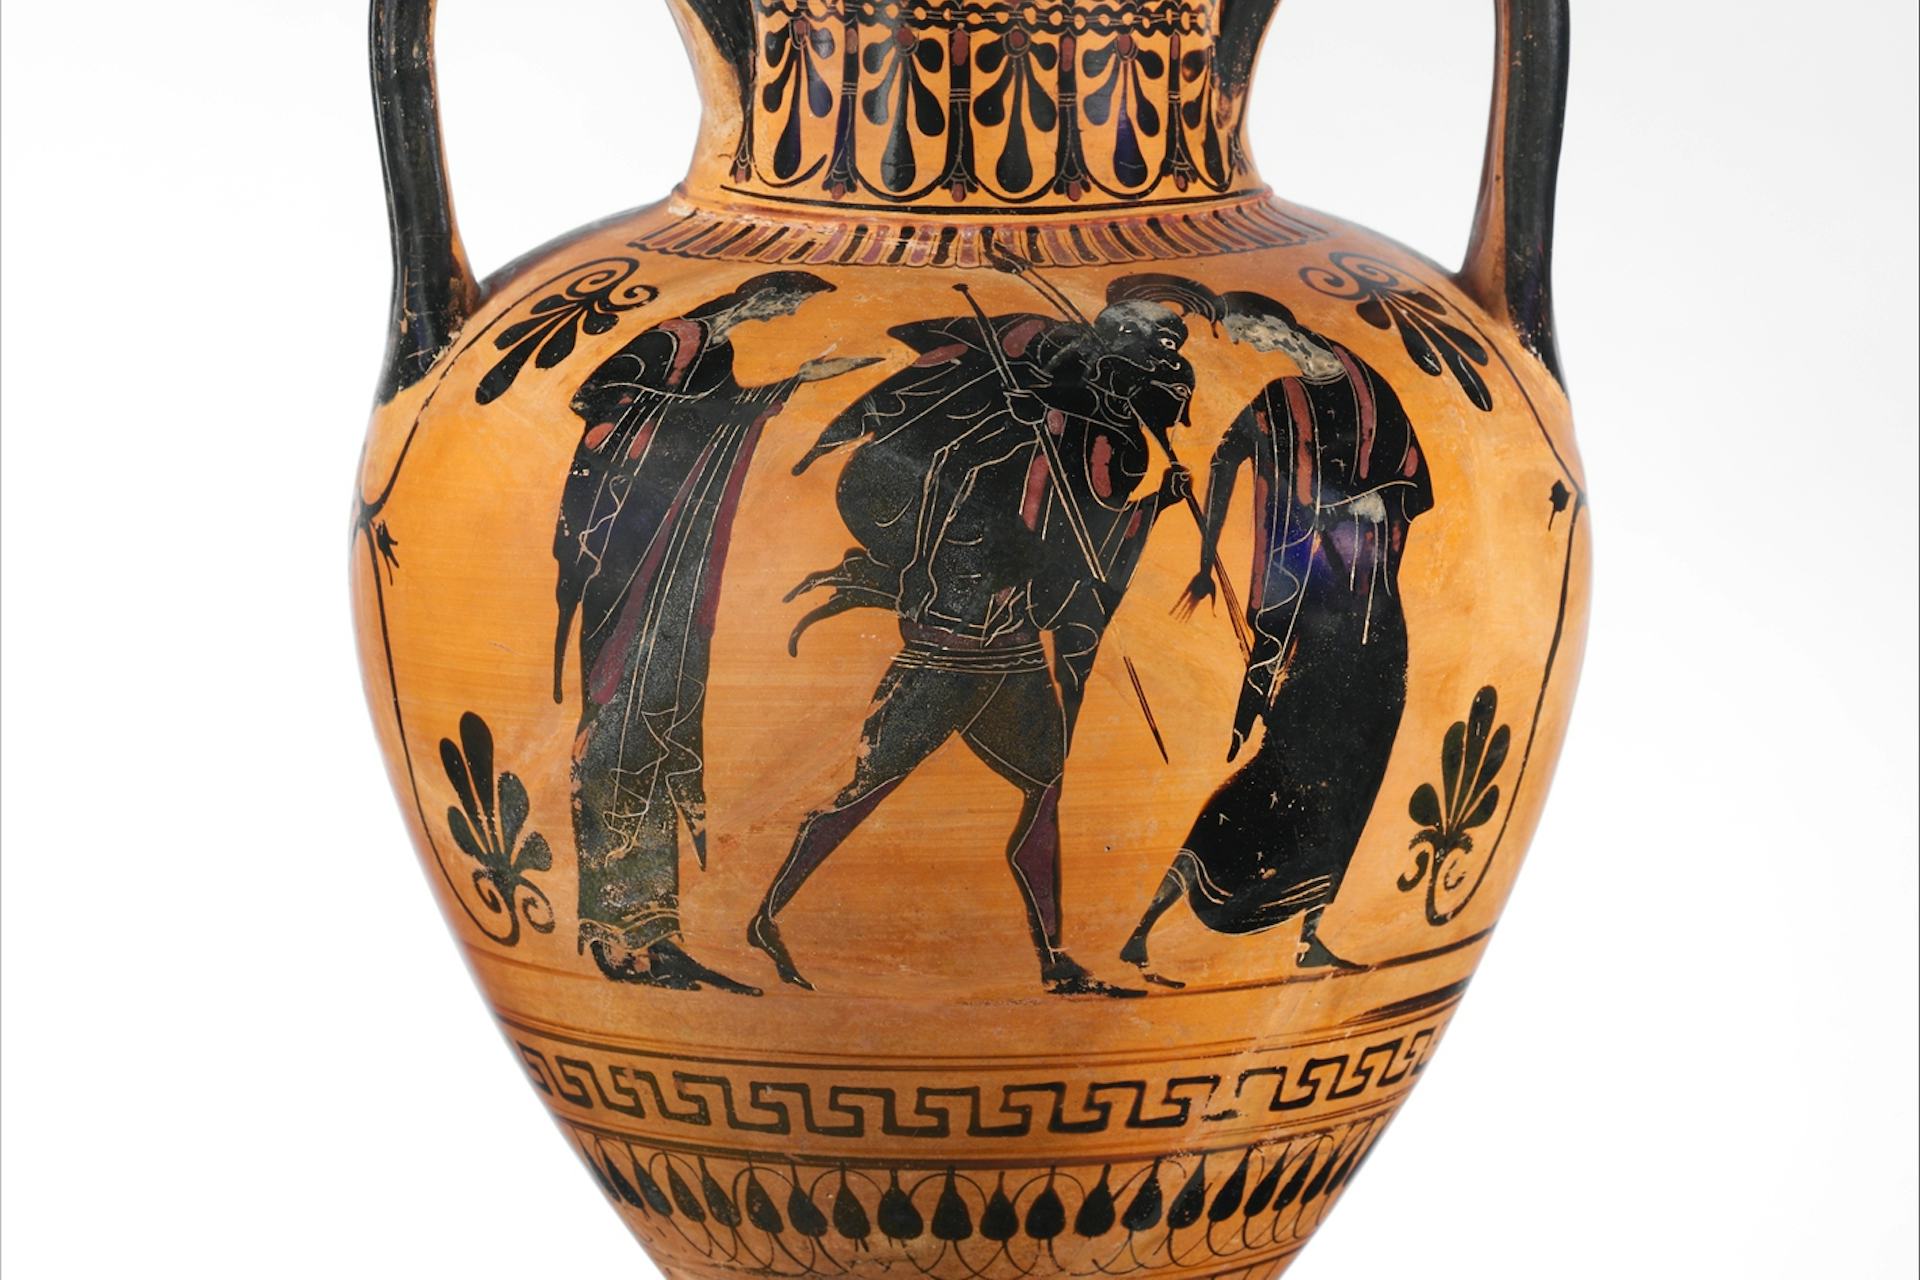 Vase painting of Aeneas carrying Anchises from Troy